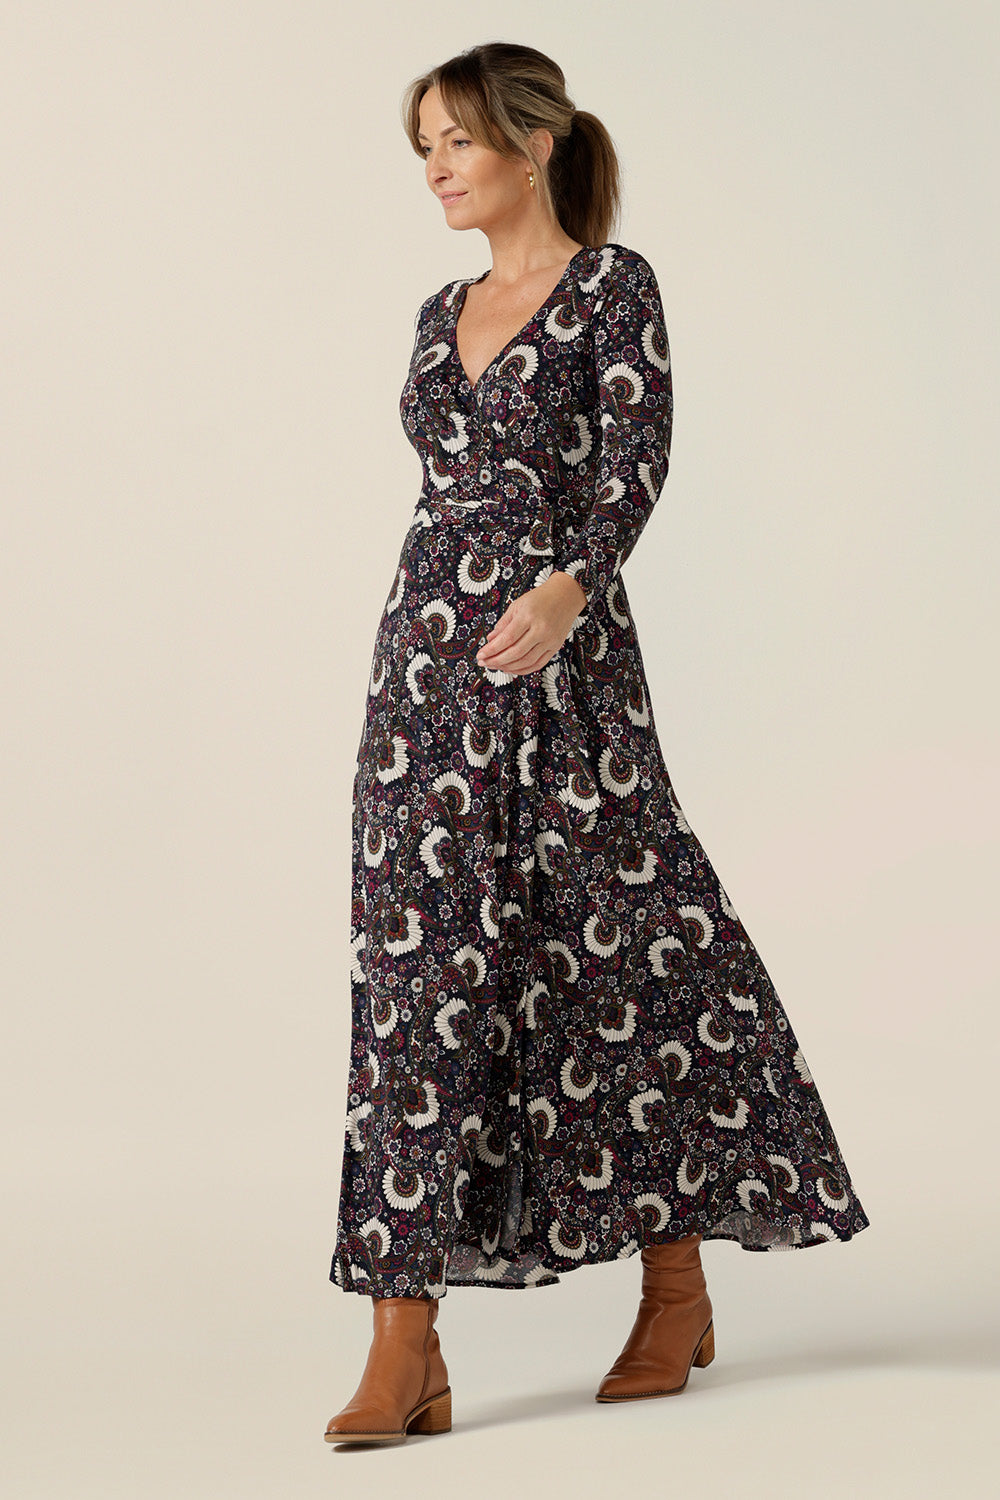 A great maxi dress for women looking for stylish 40 plus fashion, the Kimberley maxi dress has long sleeves, pockets and a V-neck. This full-length, wrap dress in paisley print jersey is made in Australia by Australian and New Zealand fashion brand, L&F.